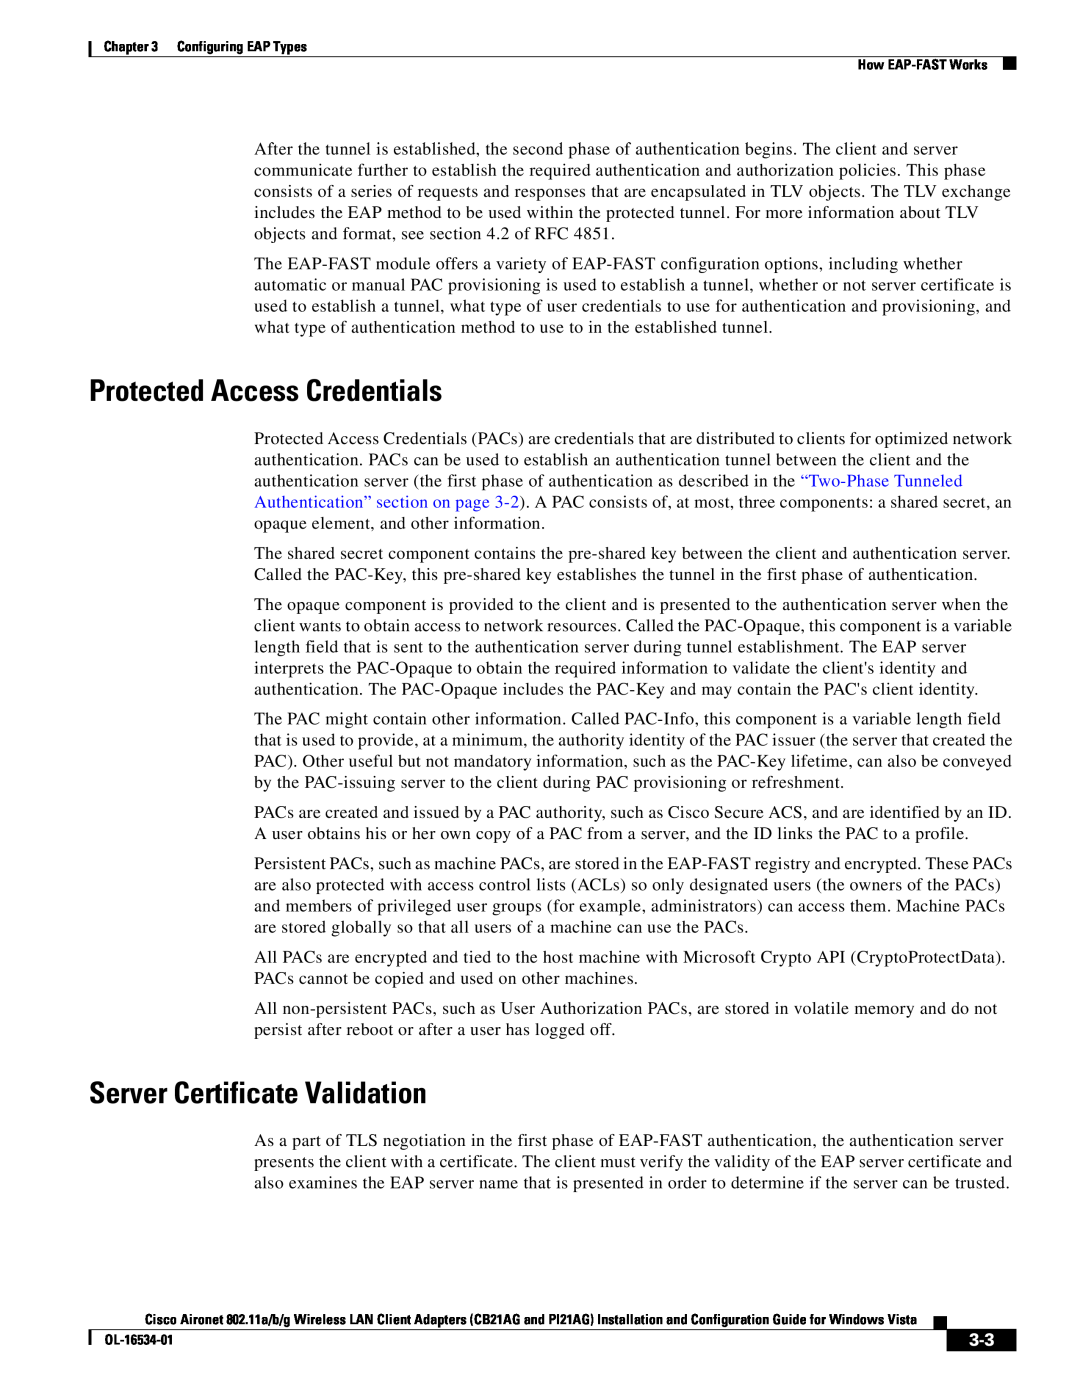 Cisco Systems CB21AG, PI21AG manual Protected Access Credentials, Server Certificate Validation 